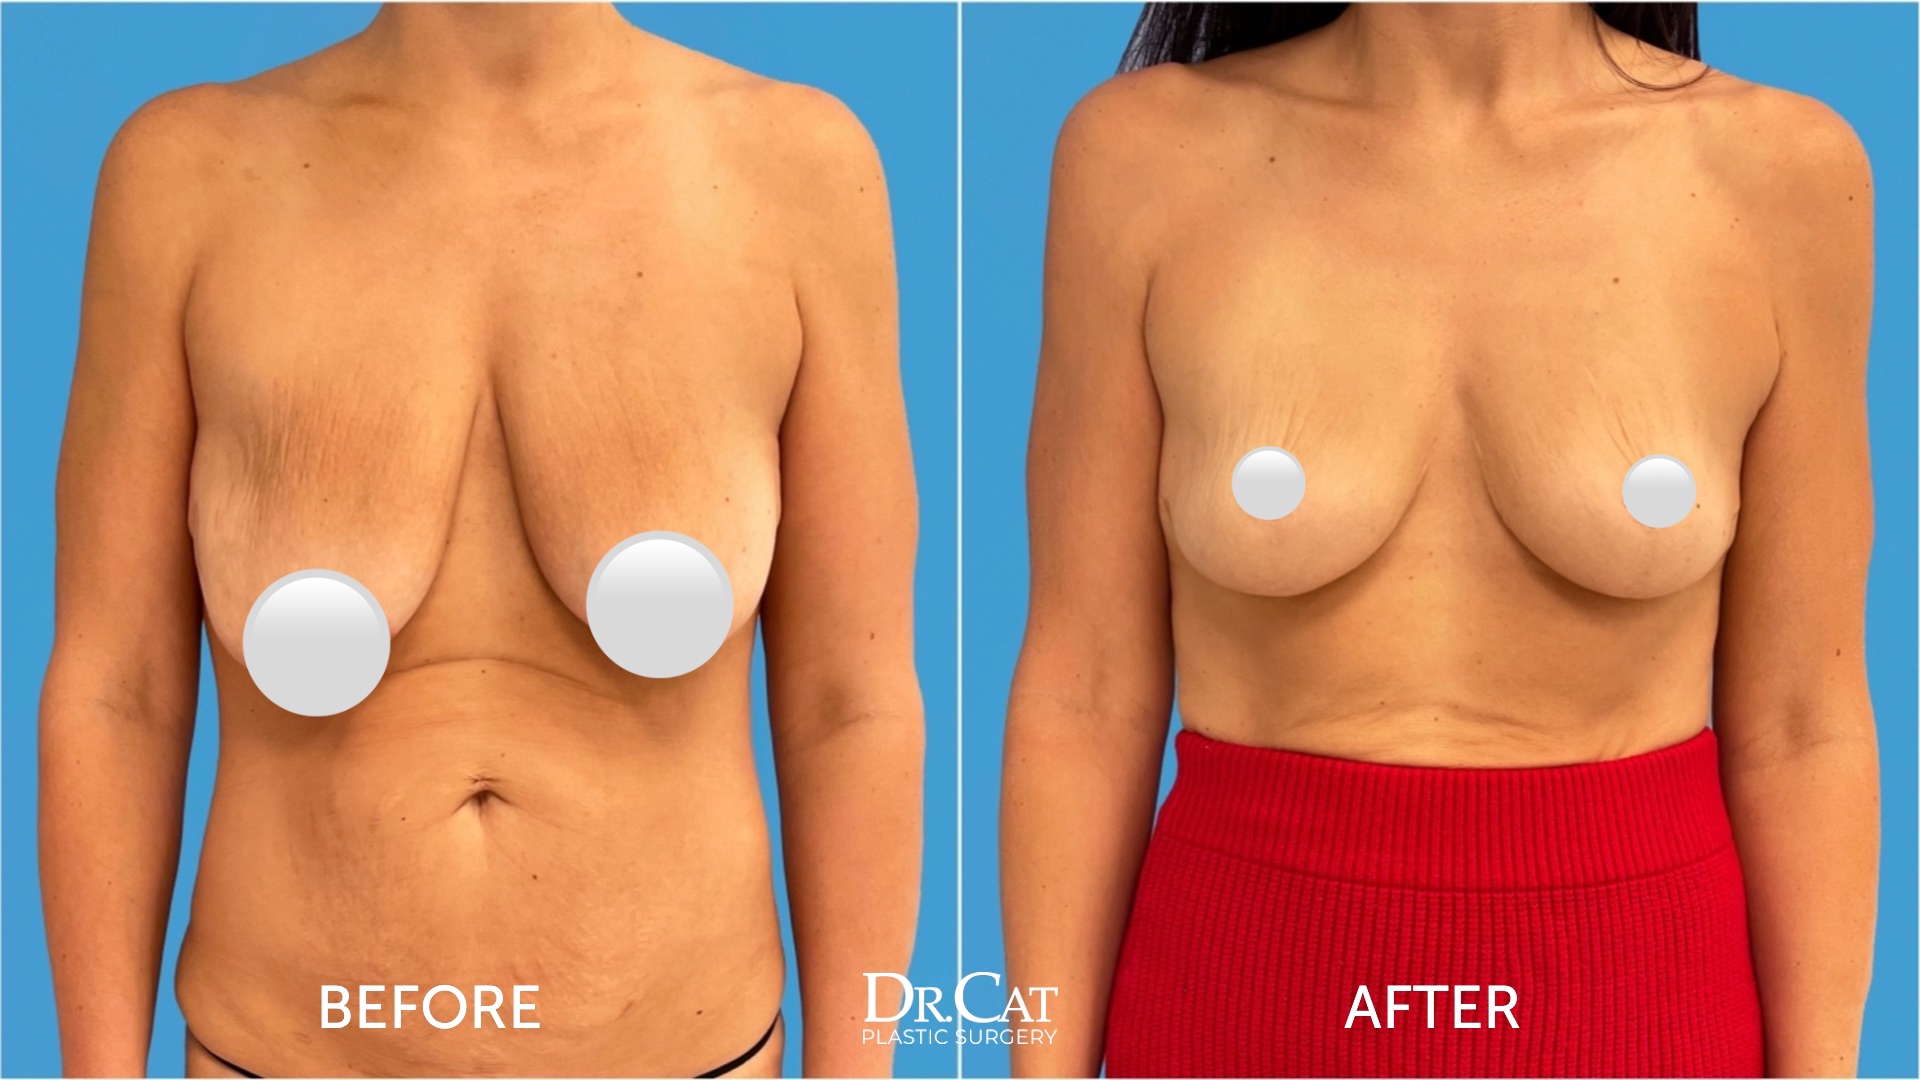 Is Breast Reduction Surgery Right for Me?